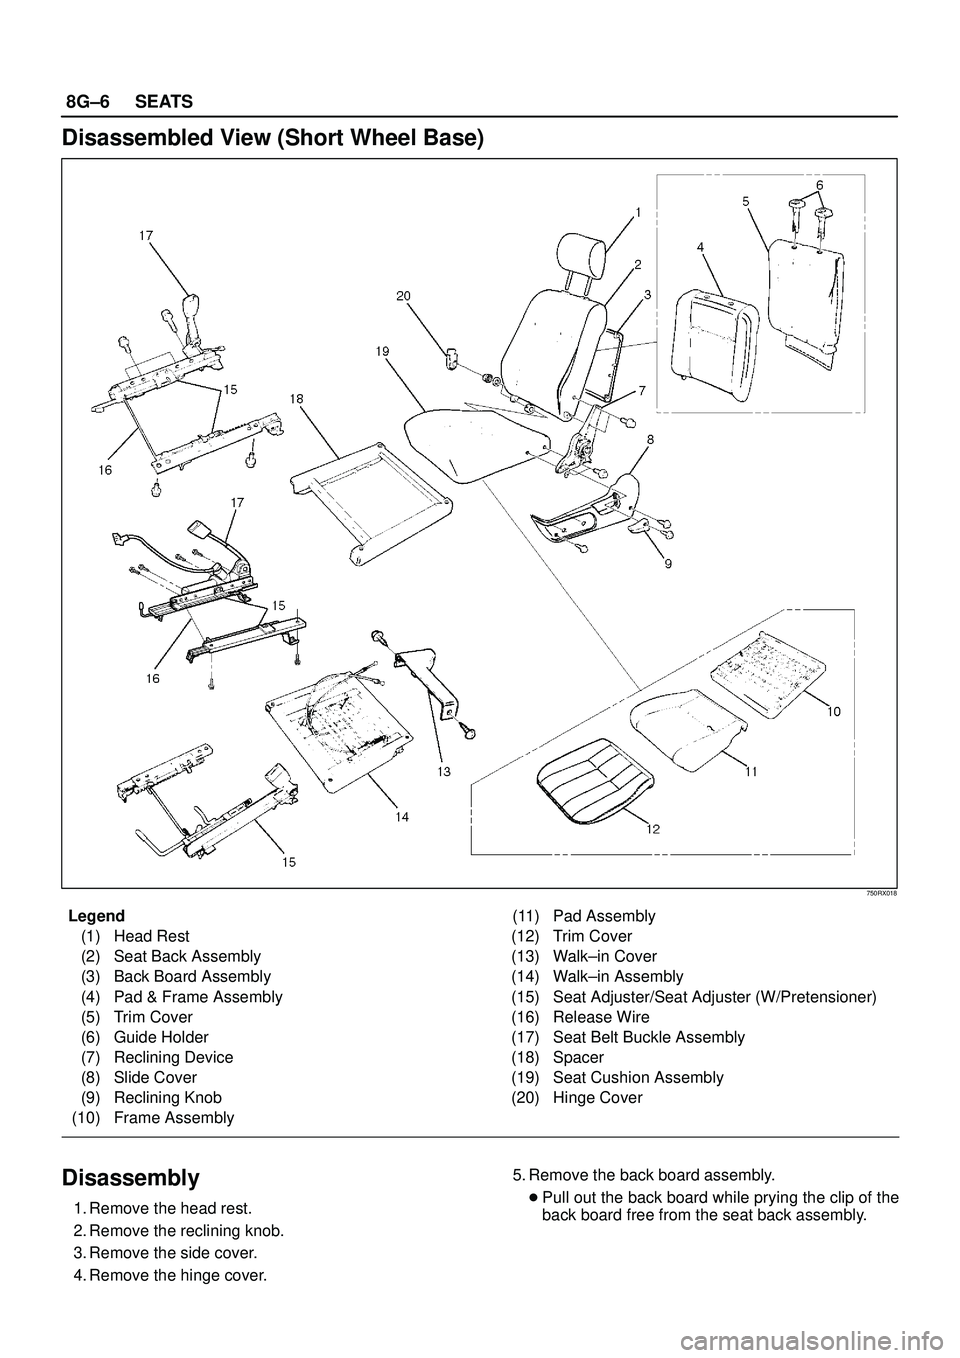 ISUZU TROOPER 1998  Service Repair Manual 8G±6SEATS
Disassembled View (Short Wheel Base)
750RX018
Legend
(1) Head Rest
(2) Seat Back Assembly
(3) Back Board Assembly
(4) Pad & Frame Assembly
(5) Trim Cover
(6) Guide Holder
(7) Reclining Devi